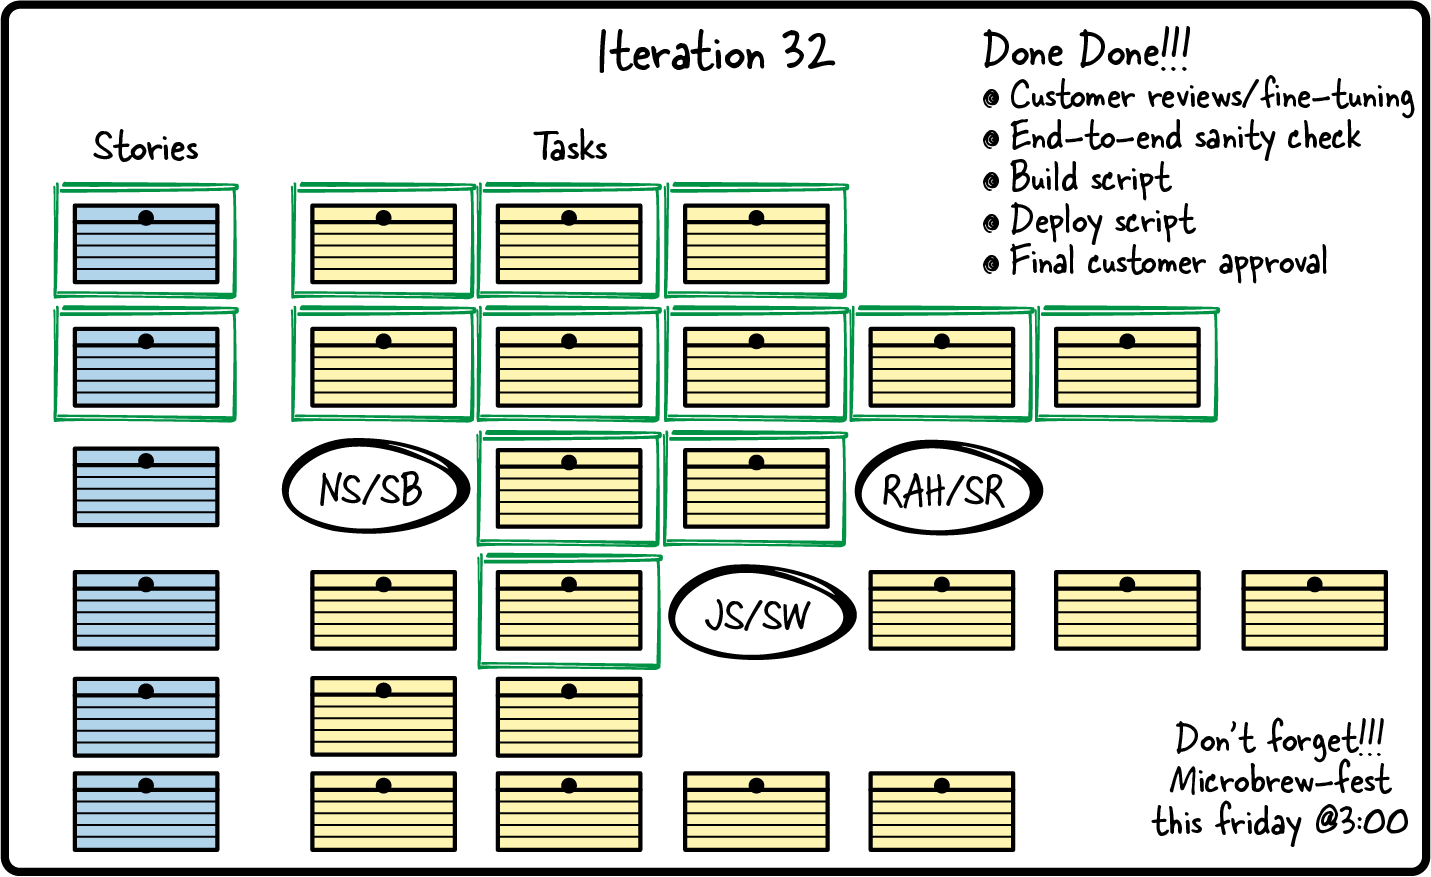 A diagram of a whiteboard. The top of the board is labelled “Iteration 32.” On the left side of the board is a column of six cards labelled “Stories.” To the right of each story is a row of cards of ranging from two to six cards in length, collectively labelled “Tasks.” The first two story cards and their tasks all have a box drawn around them. On the third row, the second and third task cards are boxed, but the first and fourth have been replaced with the circled initials “NS/SB” (for the first card) and “RAH/SR” (for the fourth card). On the fourth row of task cards, only the second card has been boxed. The third card has been replaced with the circled initials “JS/SW,” and the remaining task cards are unmarked. The final two rows are all unmarked, indicating that work has not yet begun on those stories. Also on the board is a “Done Done” checklist and a note about an upcoming microbrew-fest.